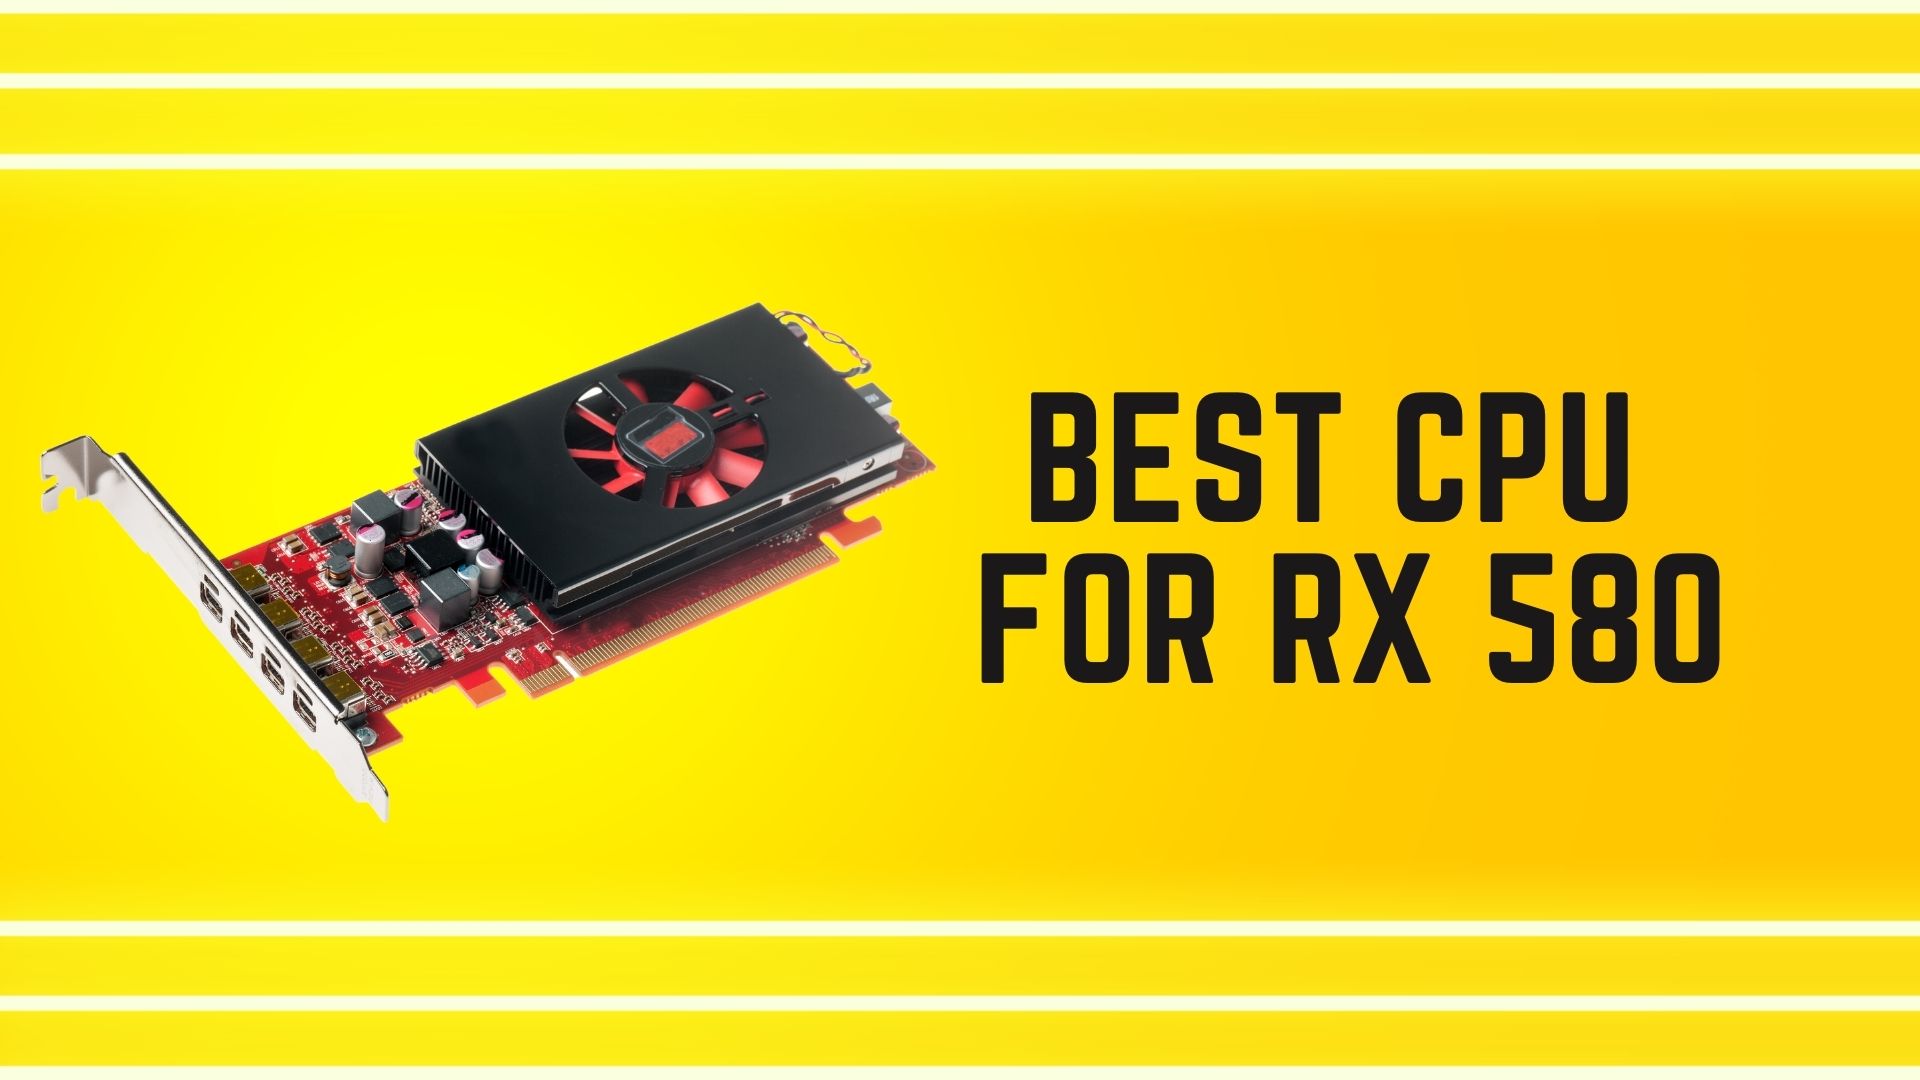 Best CPU for RX 580